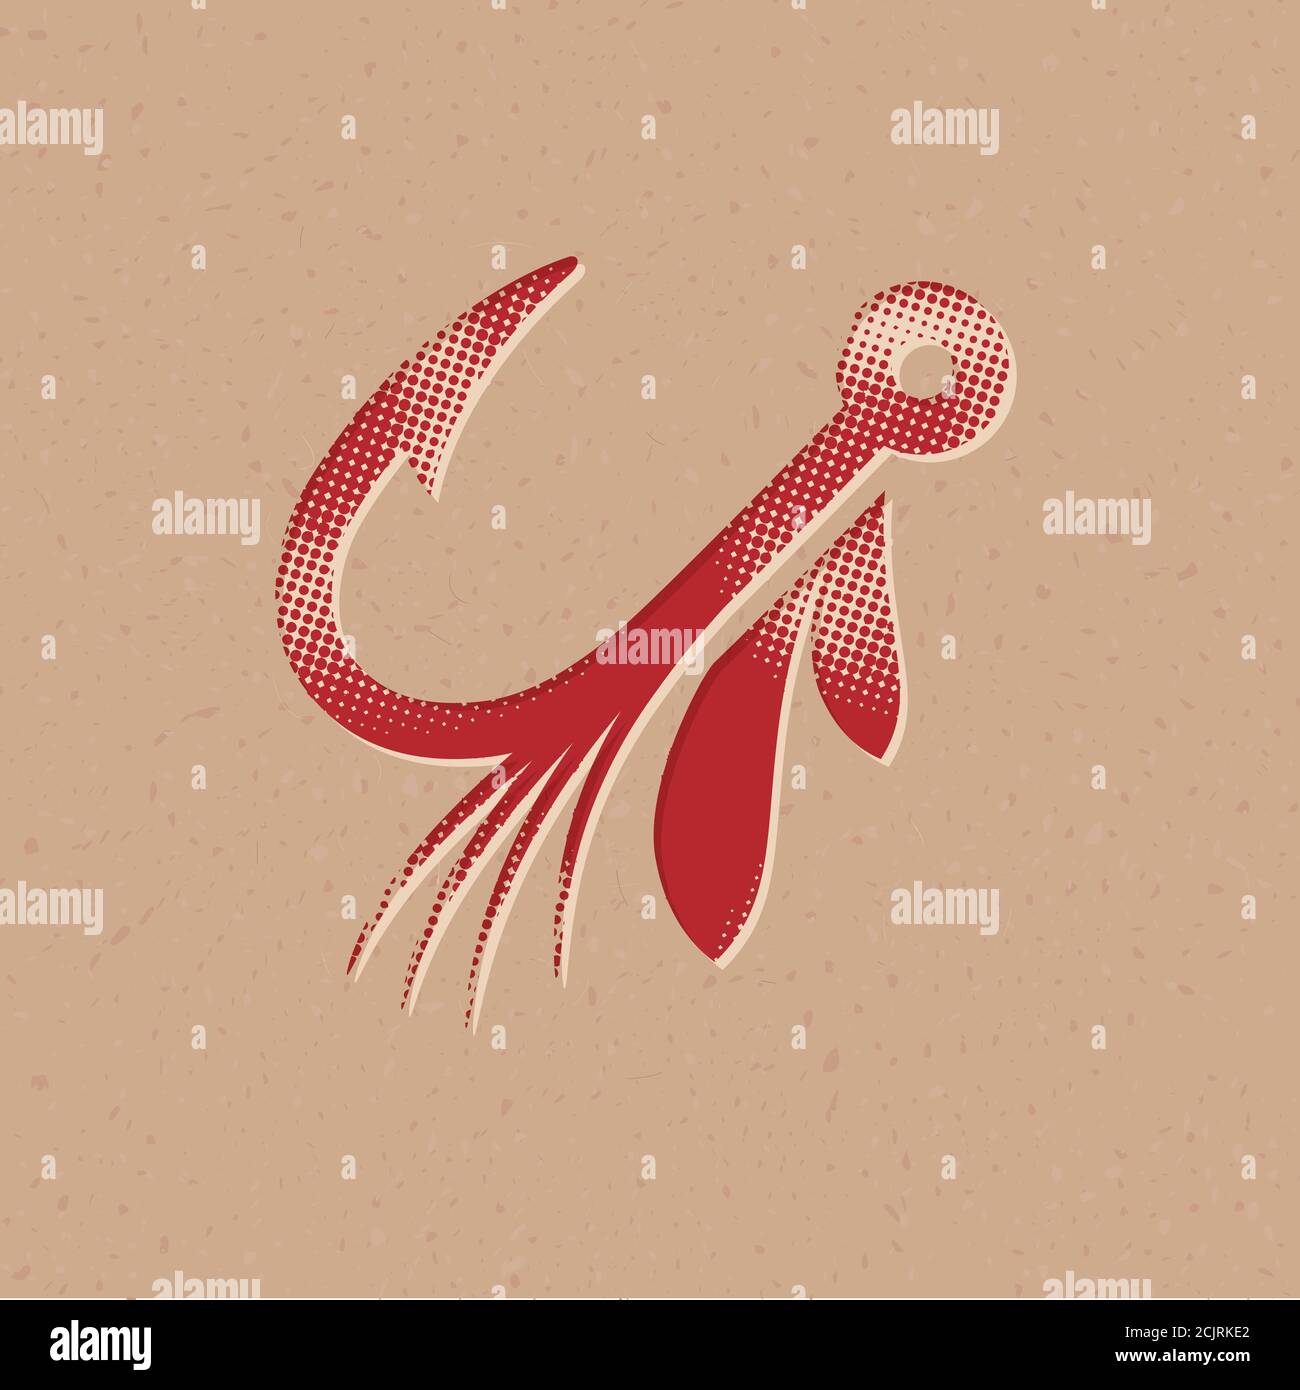 Fishing lure icon in halftone style. Grunge background vector illustration. Stock Vector